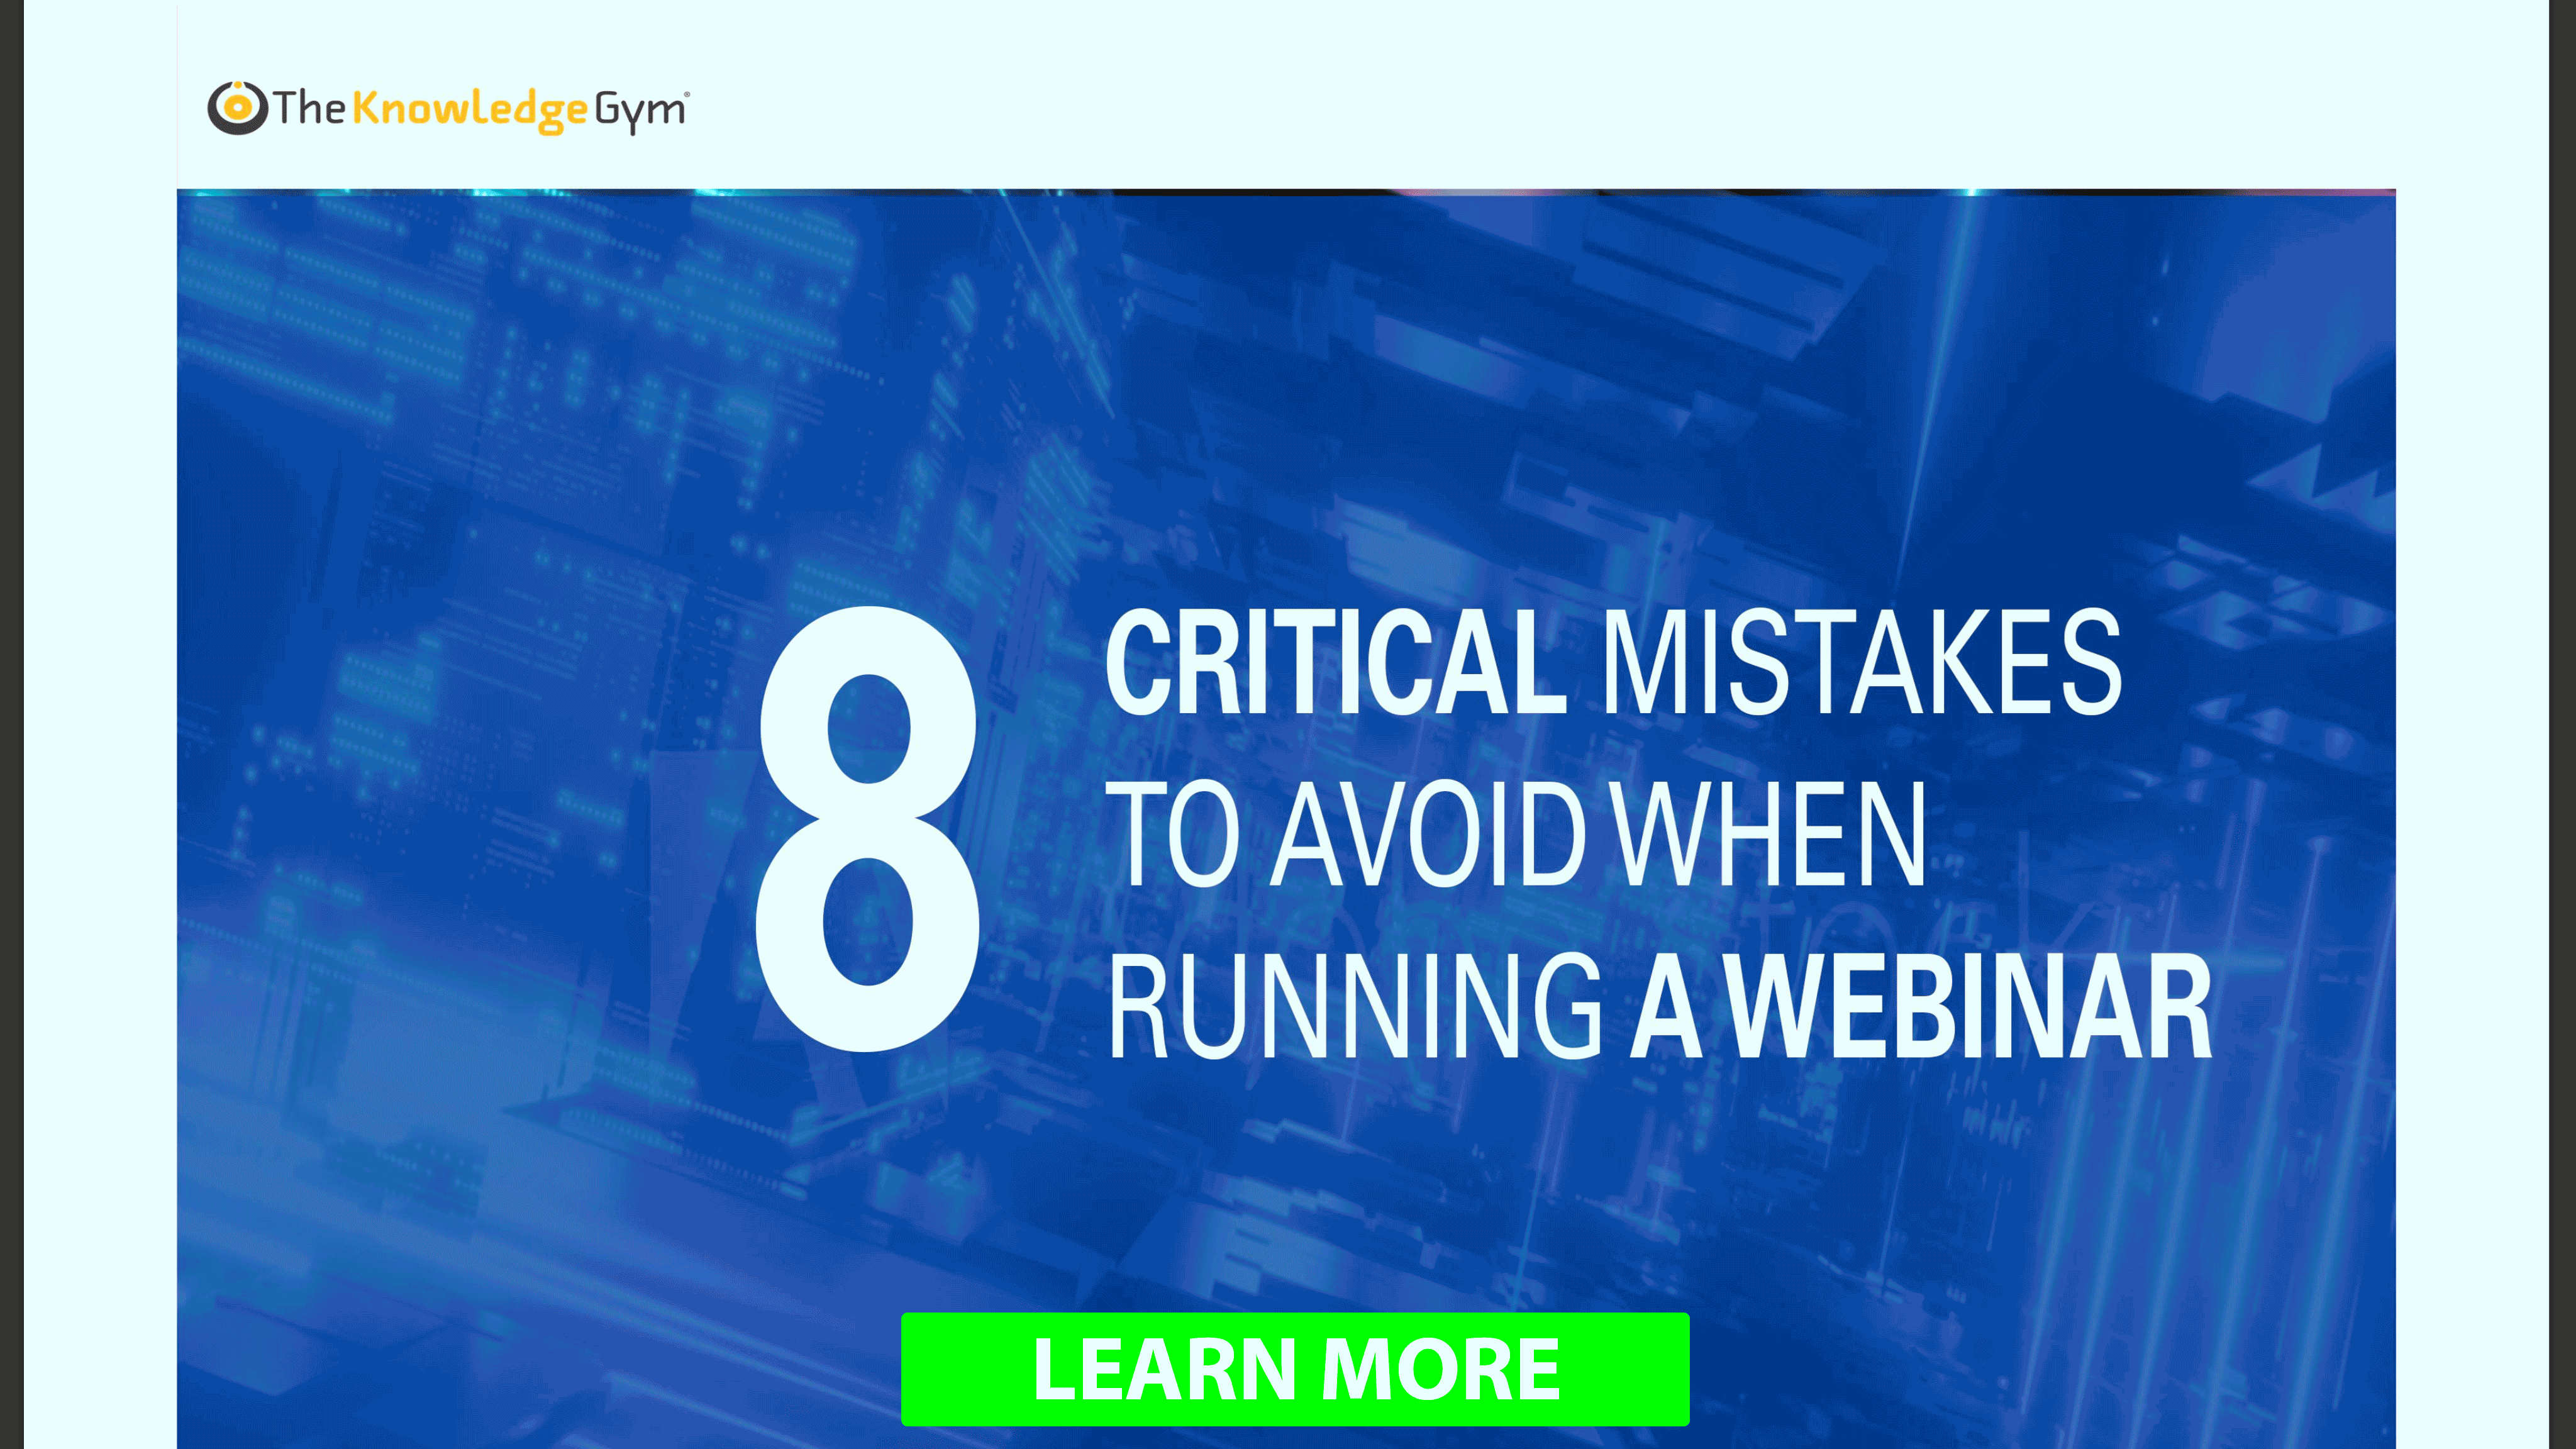 https://go.theknowledgegym.com/8-critical-mistakes-in-using-webinars